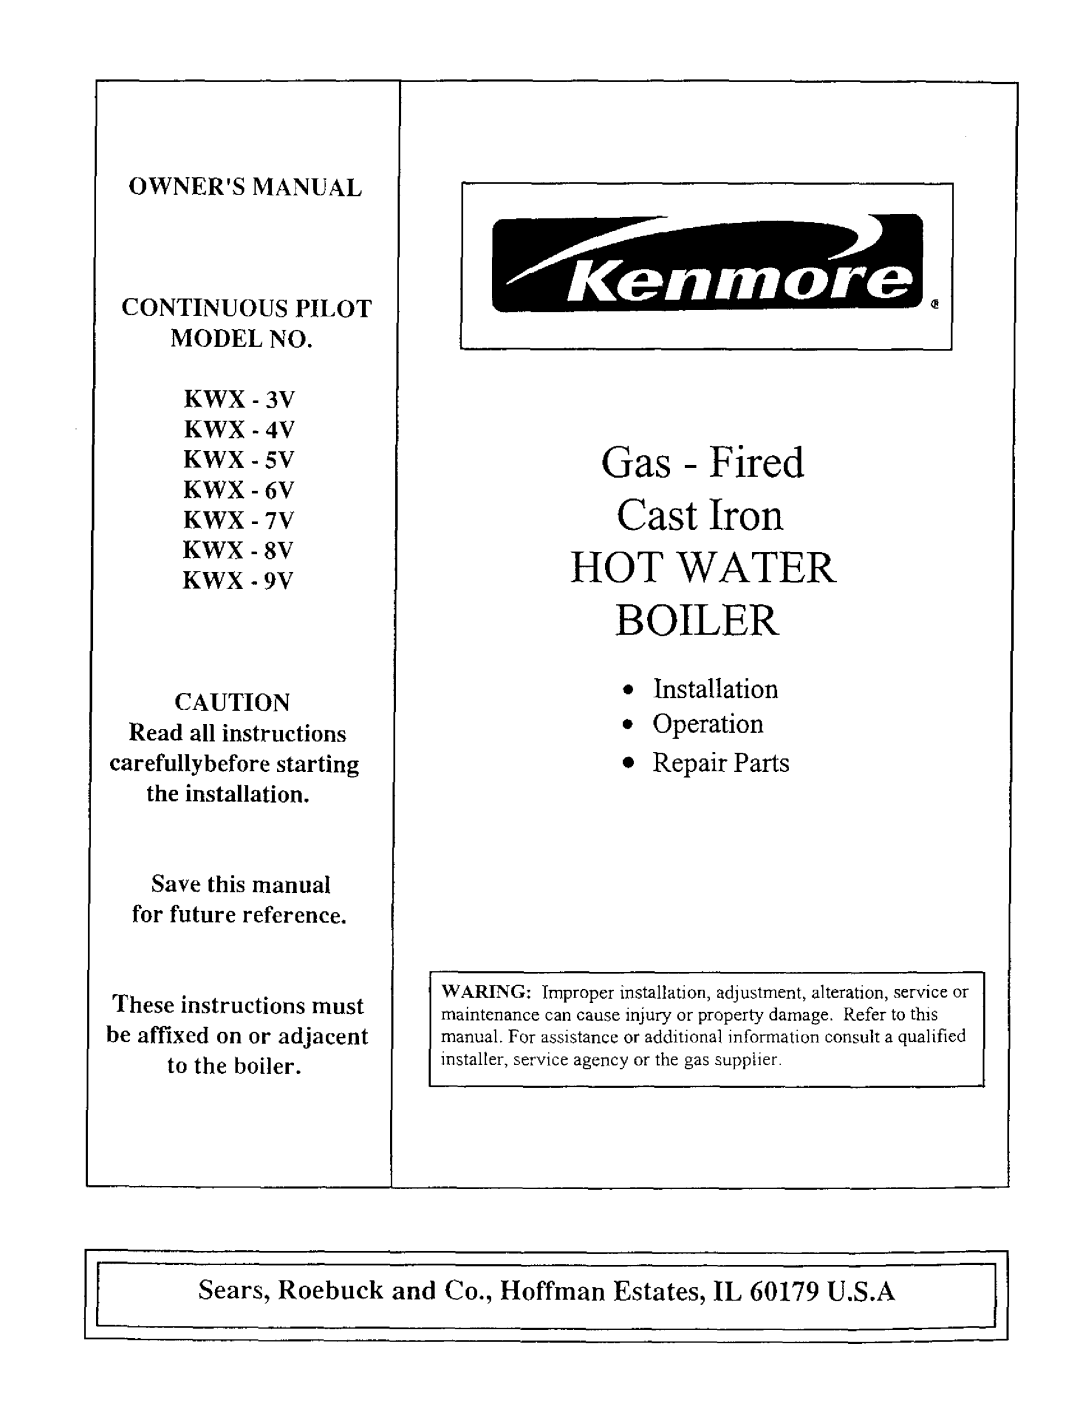 Kenmore KWX - 8V owner manual Gas- Fired Cast Iron HOT WATER BOILER, Installation Operation Repair Parts, Owners Manual 